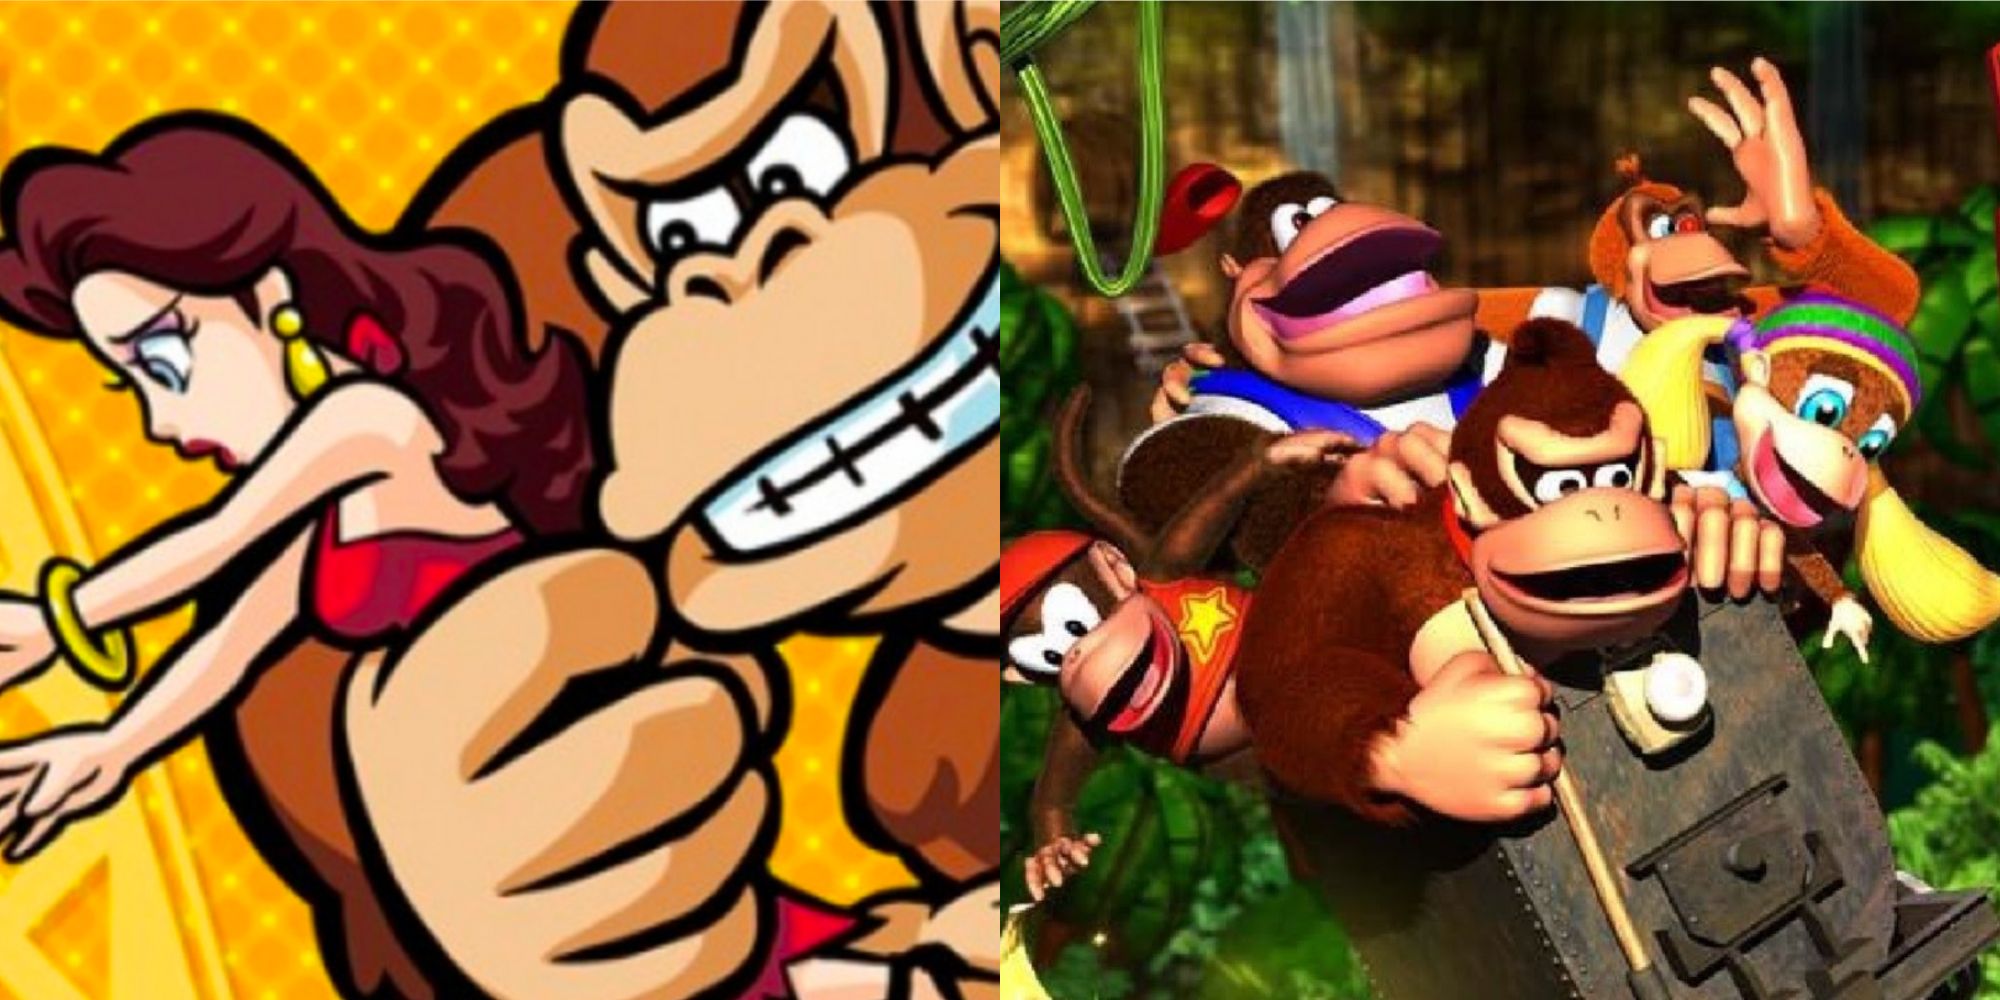 10-best-donkey-kong-games-ranked-according-to-metacritic